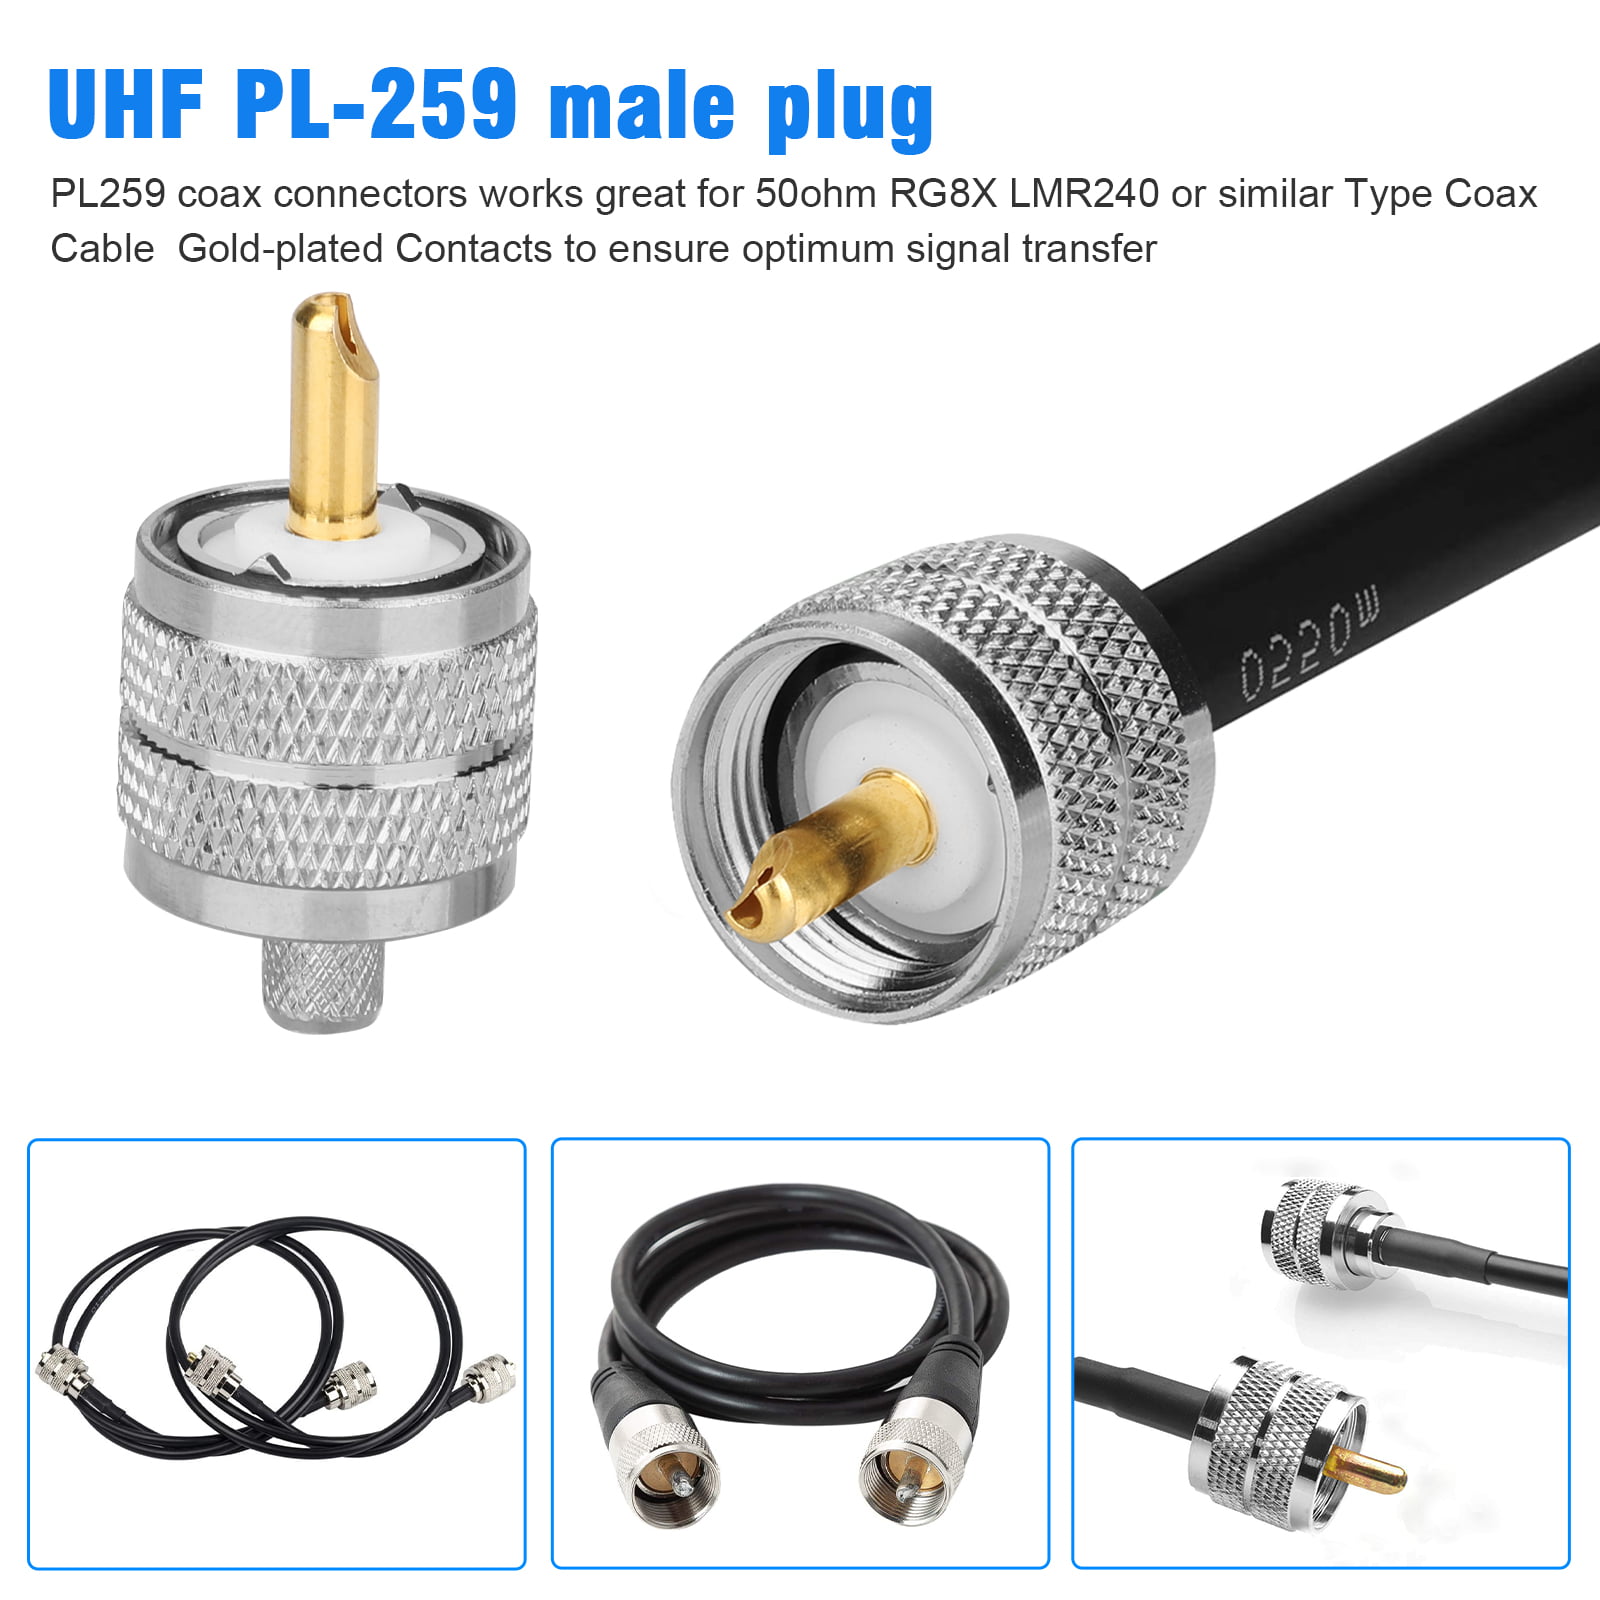 6 Foot Coaxial Cable Jumper with Quality Silver/Teflon/Solder PL-259 Connectors 